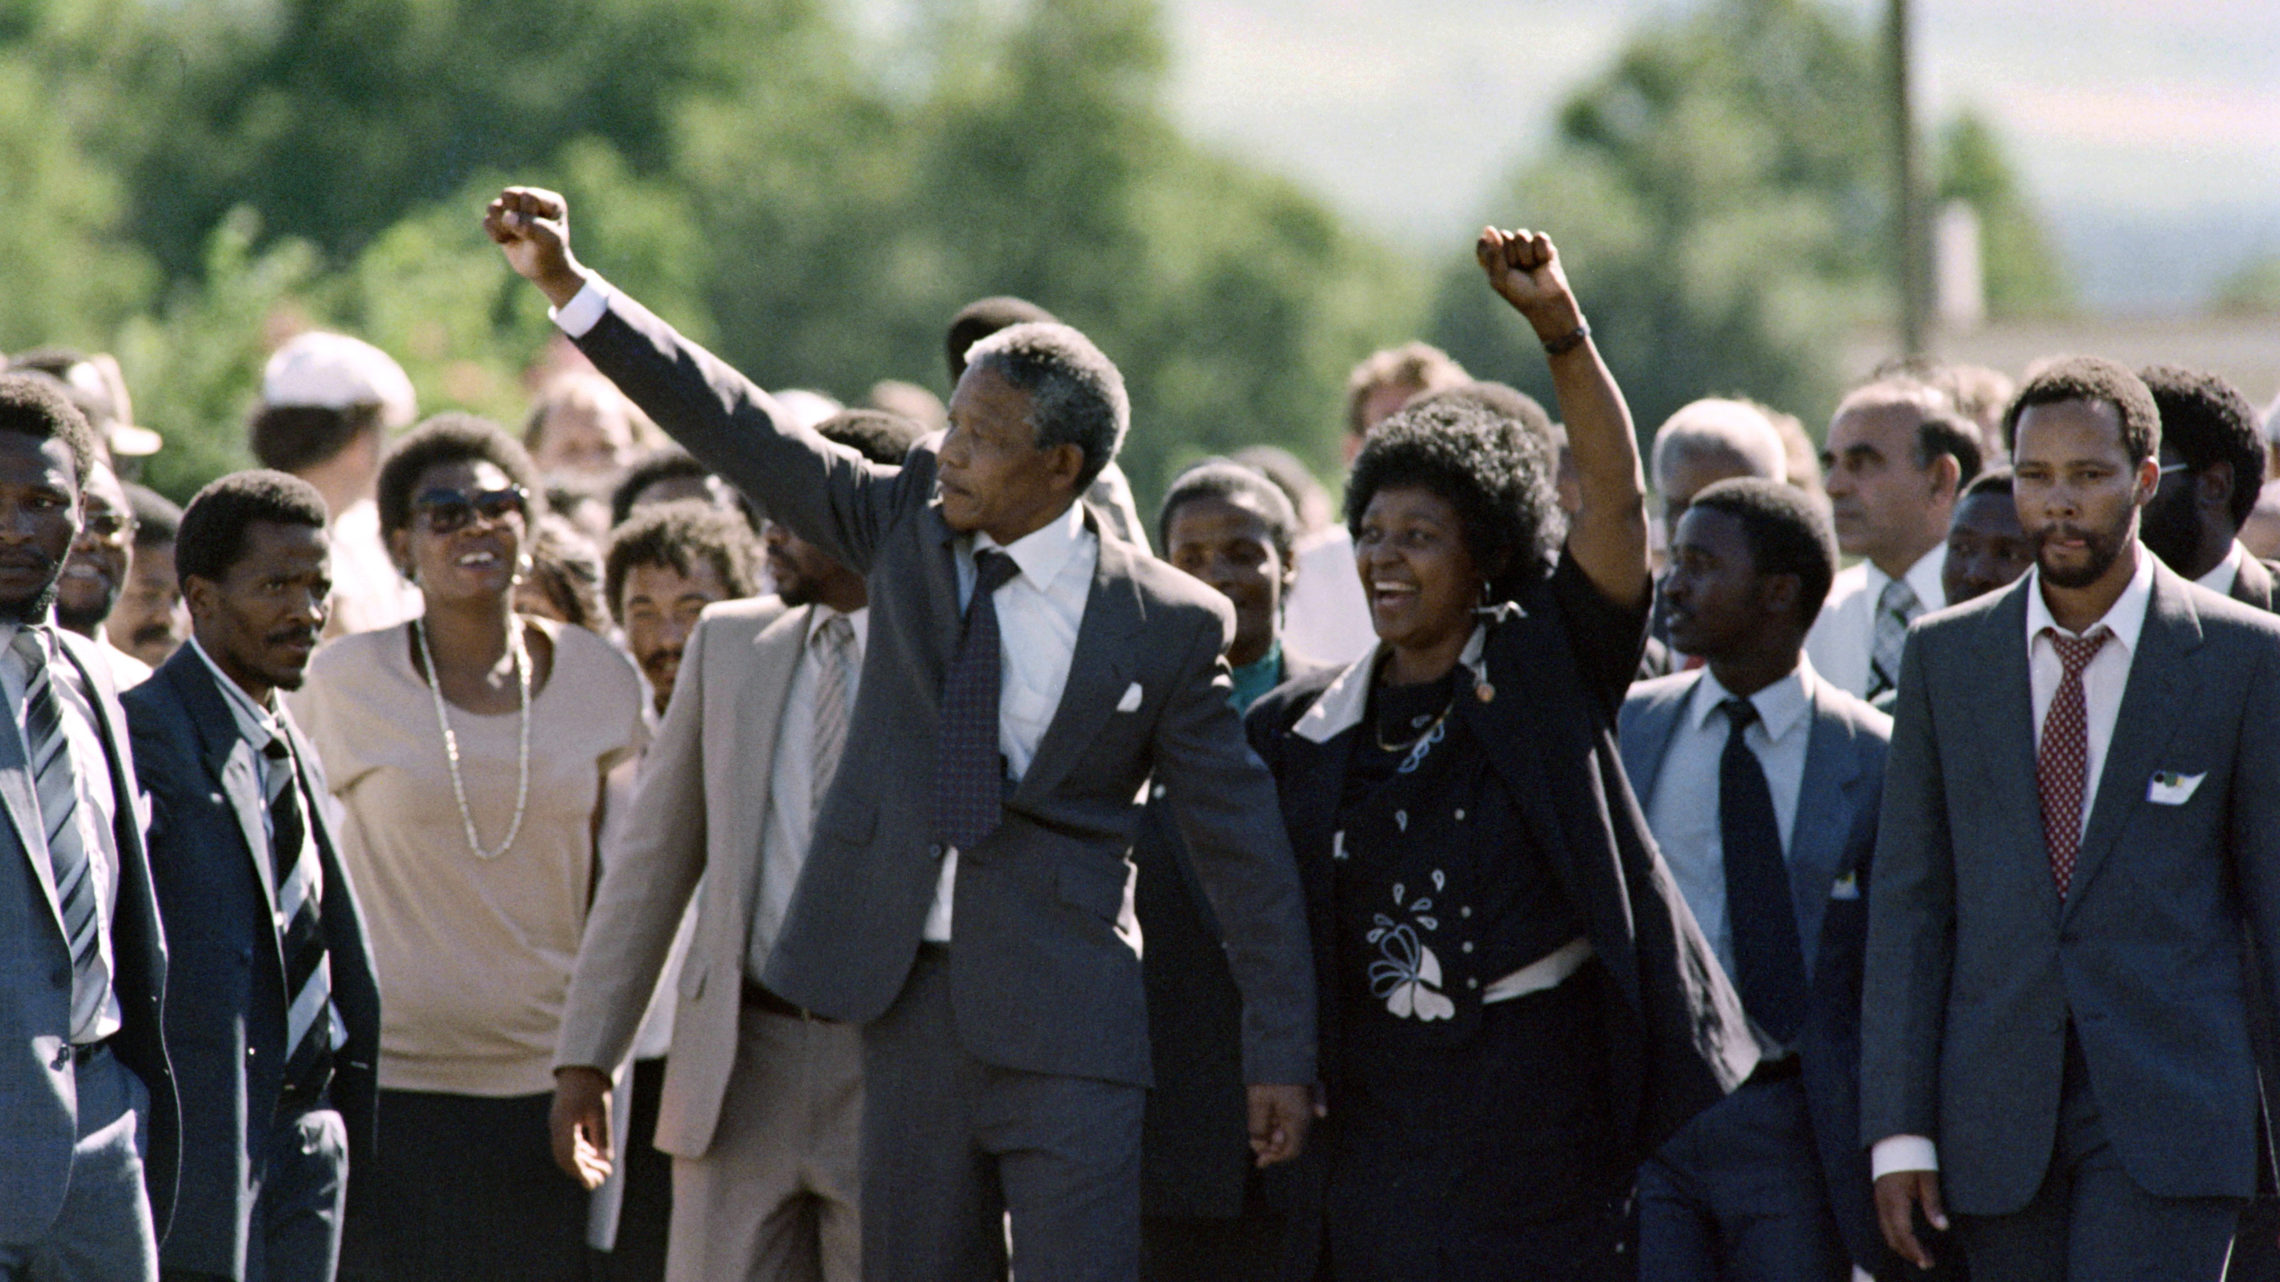 Nelson Mandela leaves prison hand in hand with his then-wife, Winnie, upon his release in 1990. CREDIT: ALEXANDER JOE